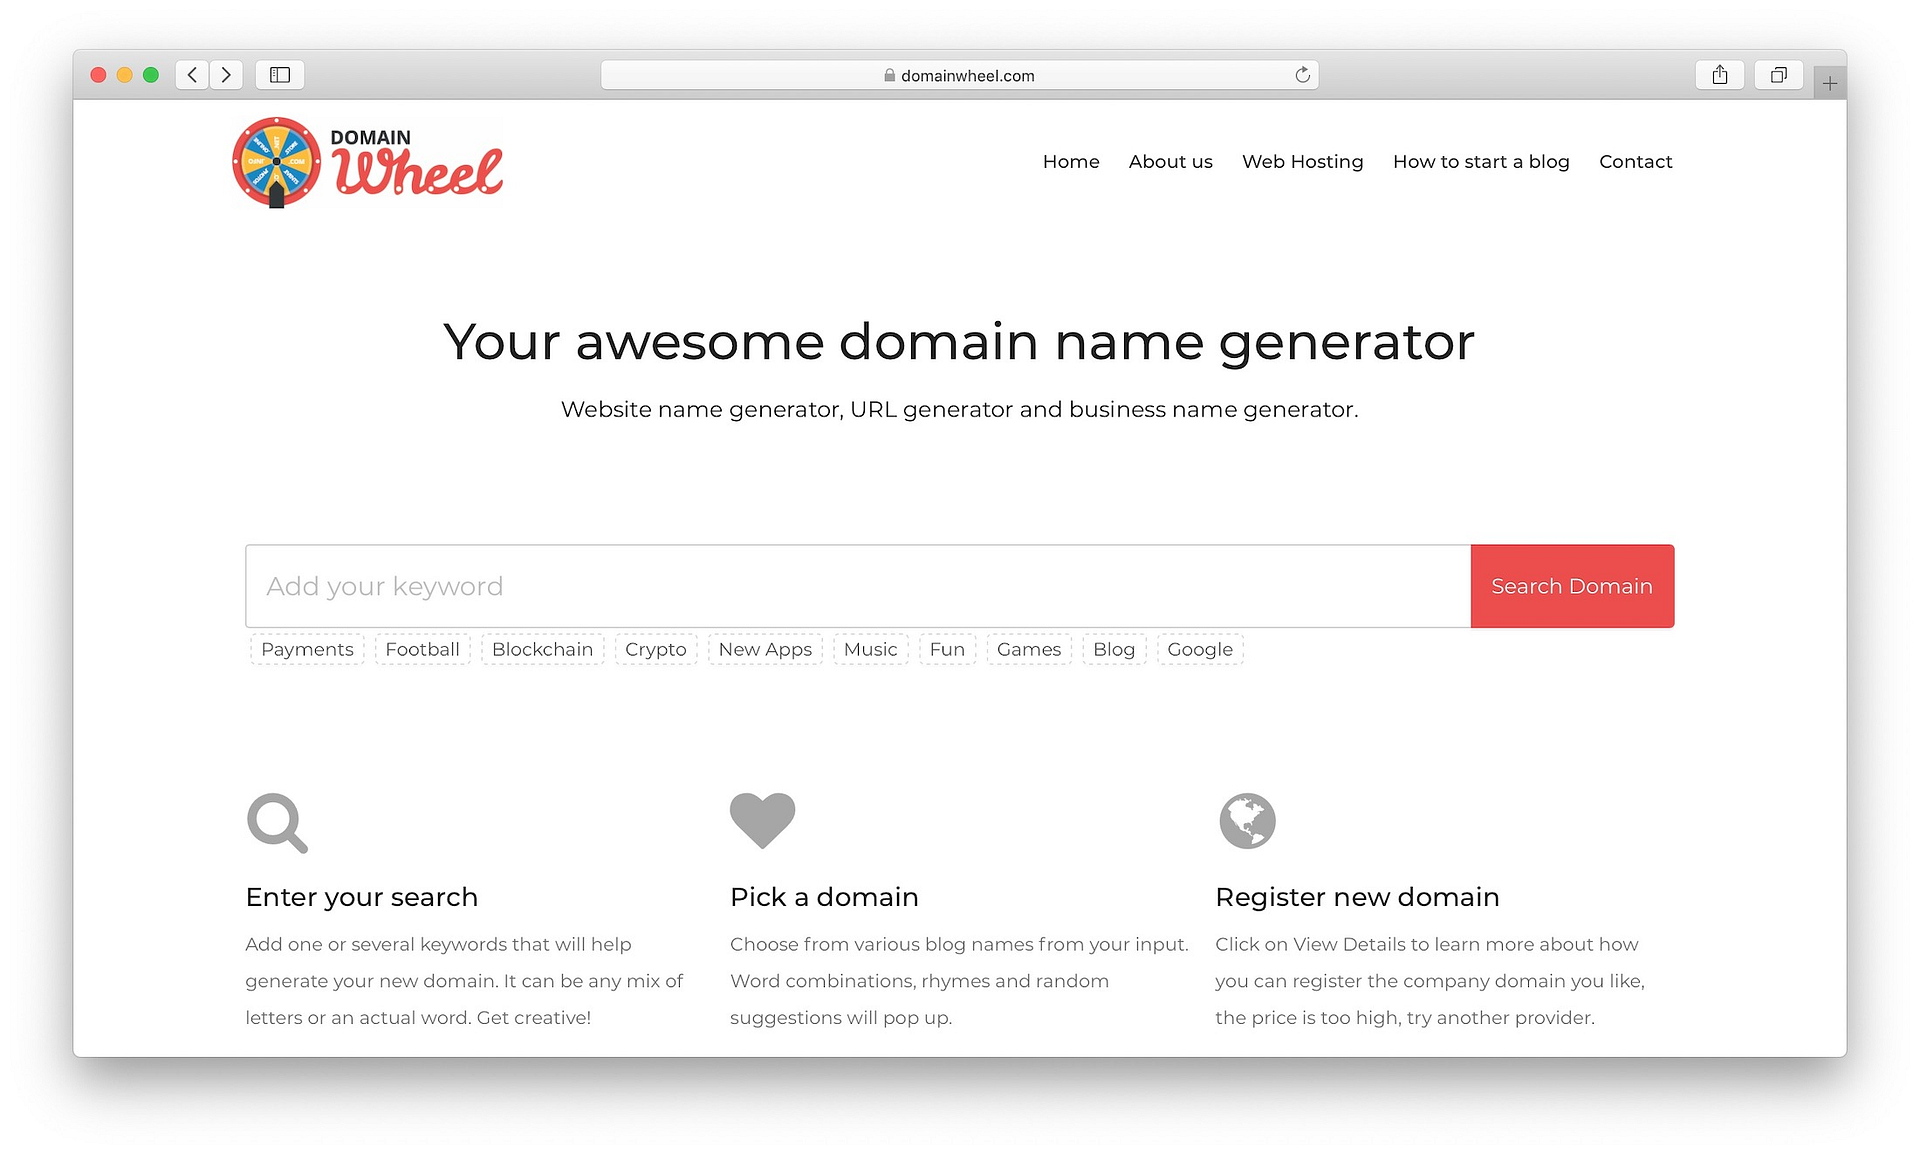 11 Best Blog Name Generators To Find Good Blog Name Ideas In 21